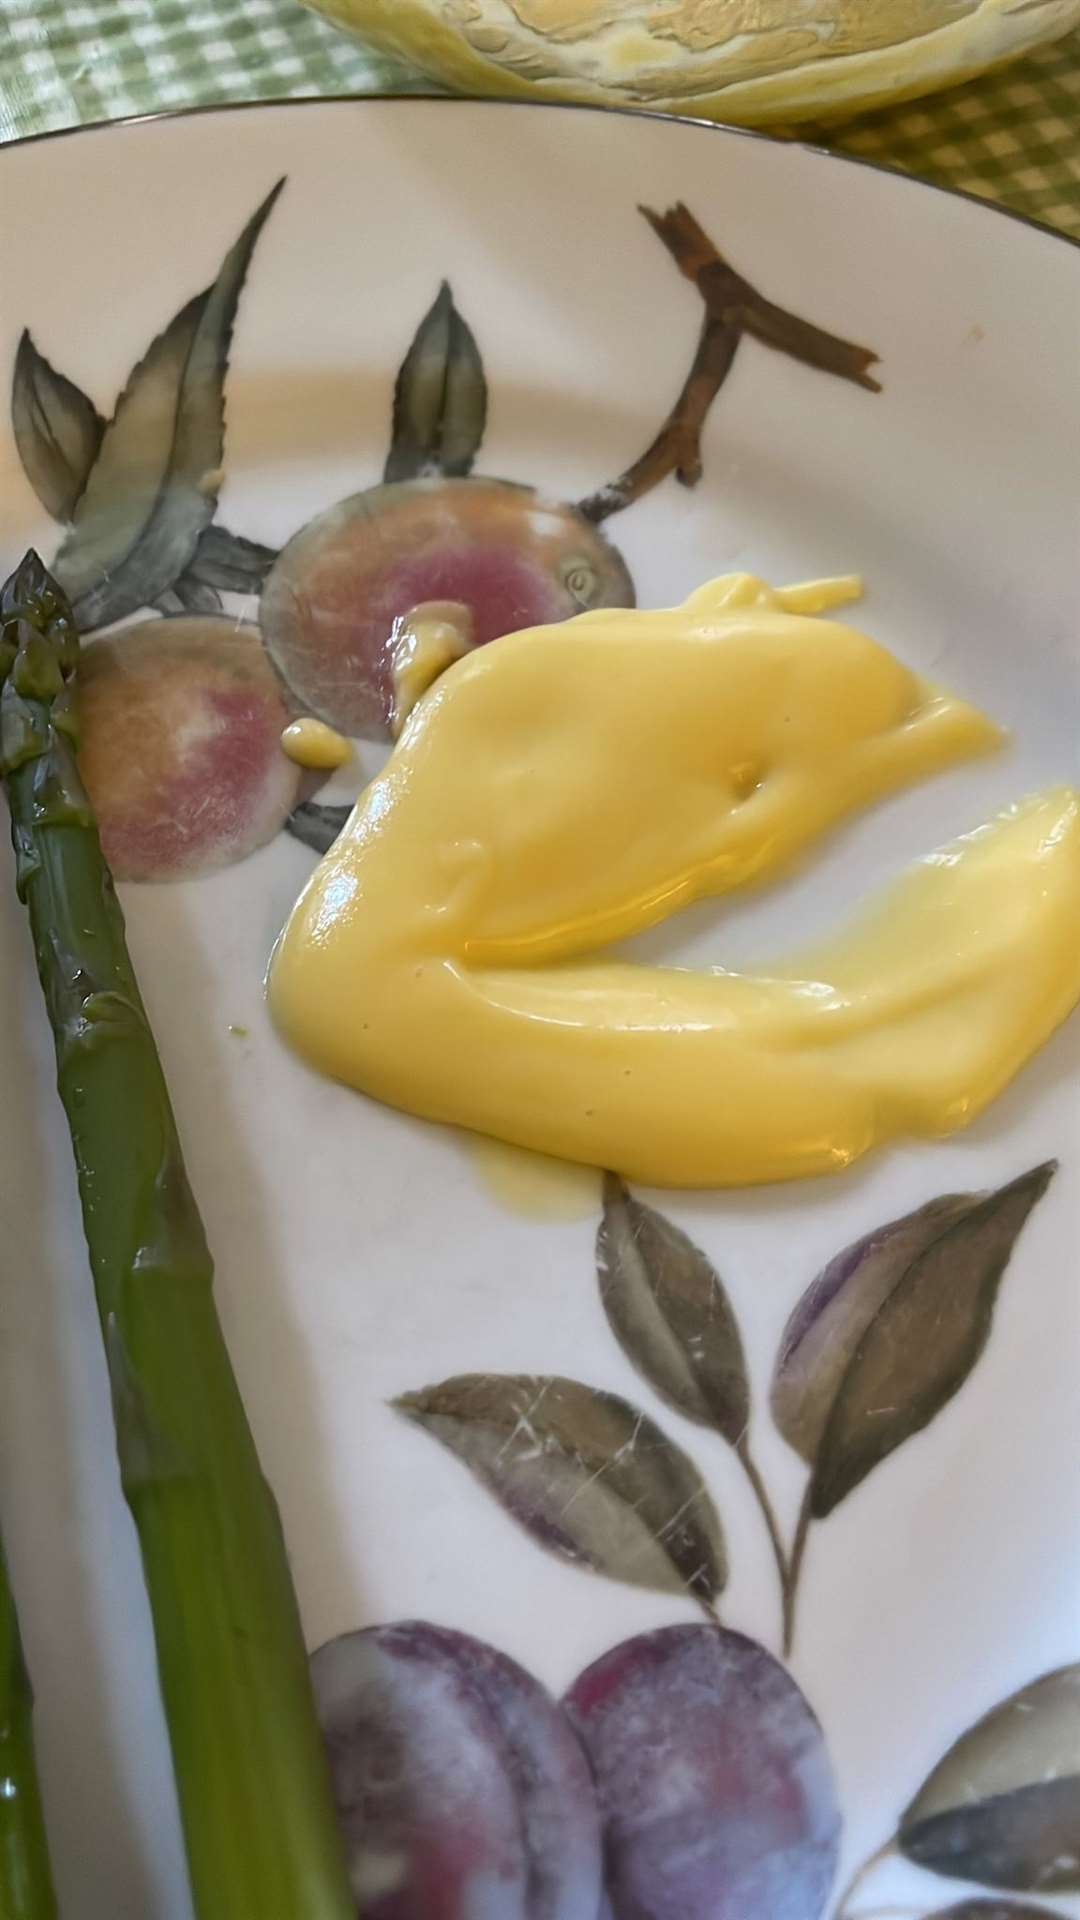 And here's a Hollandaise sauce that I prepared at home!